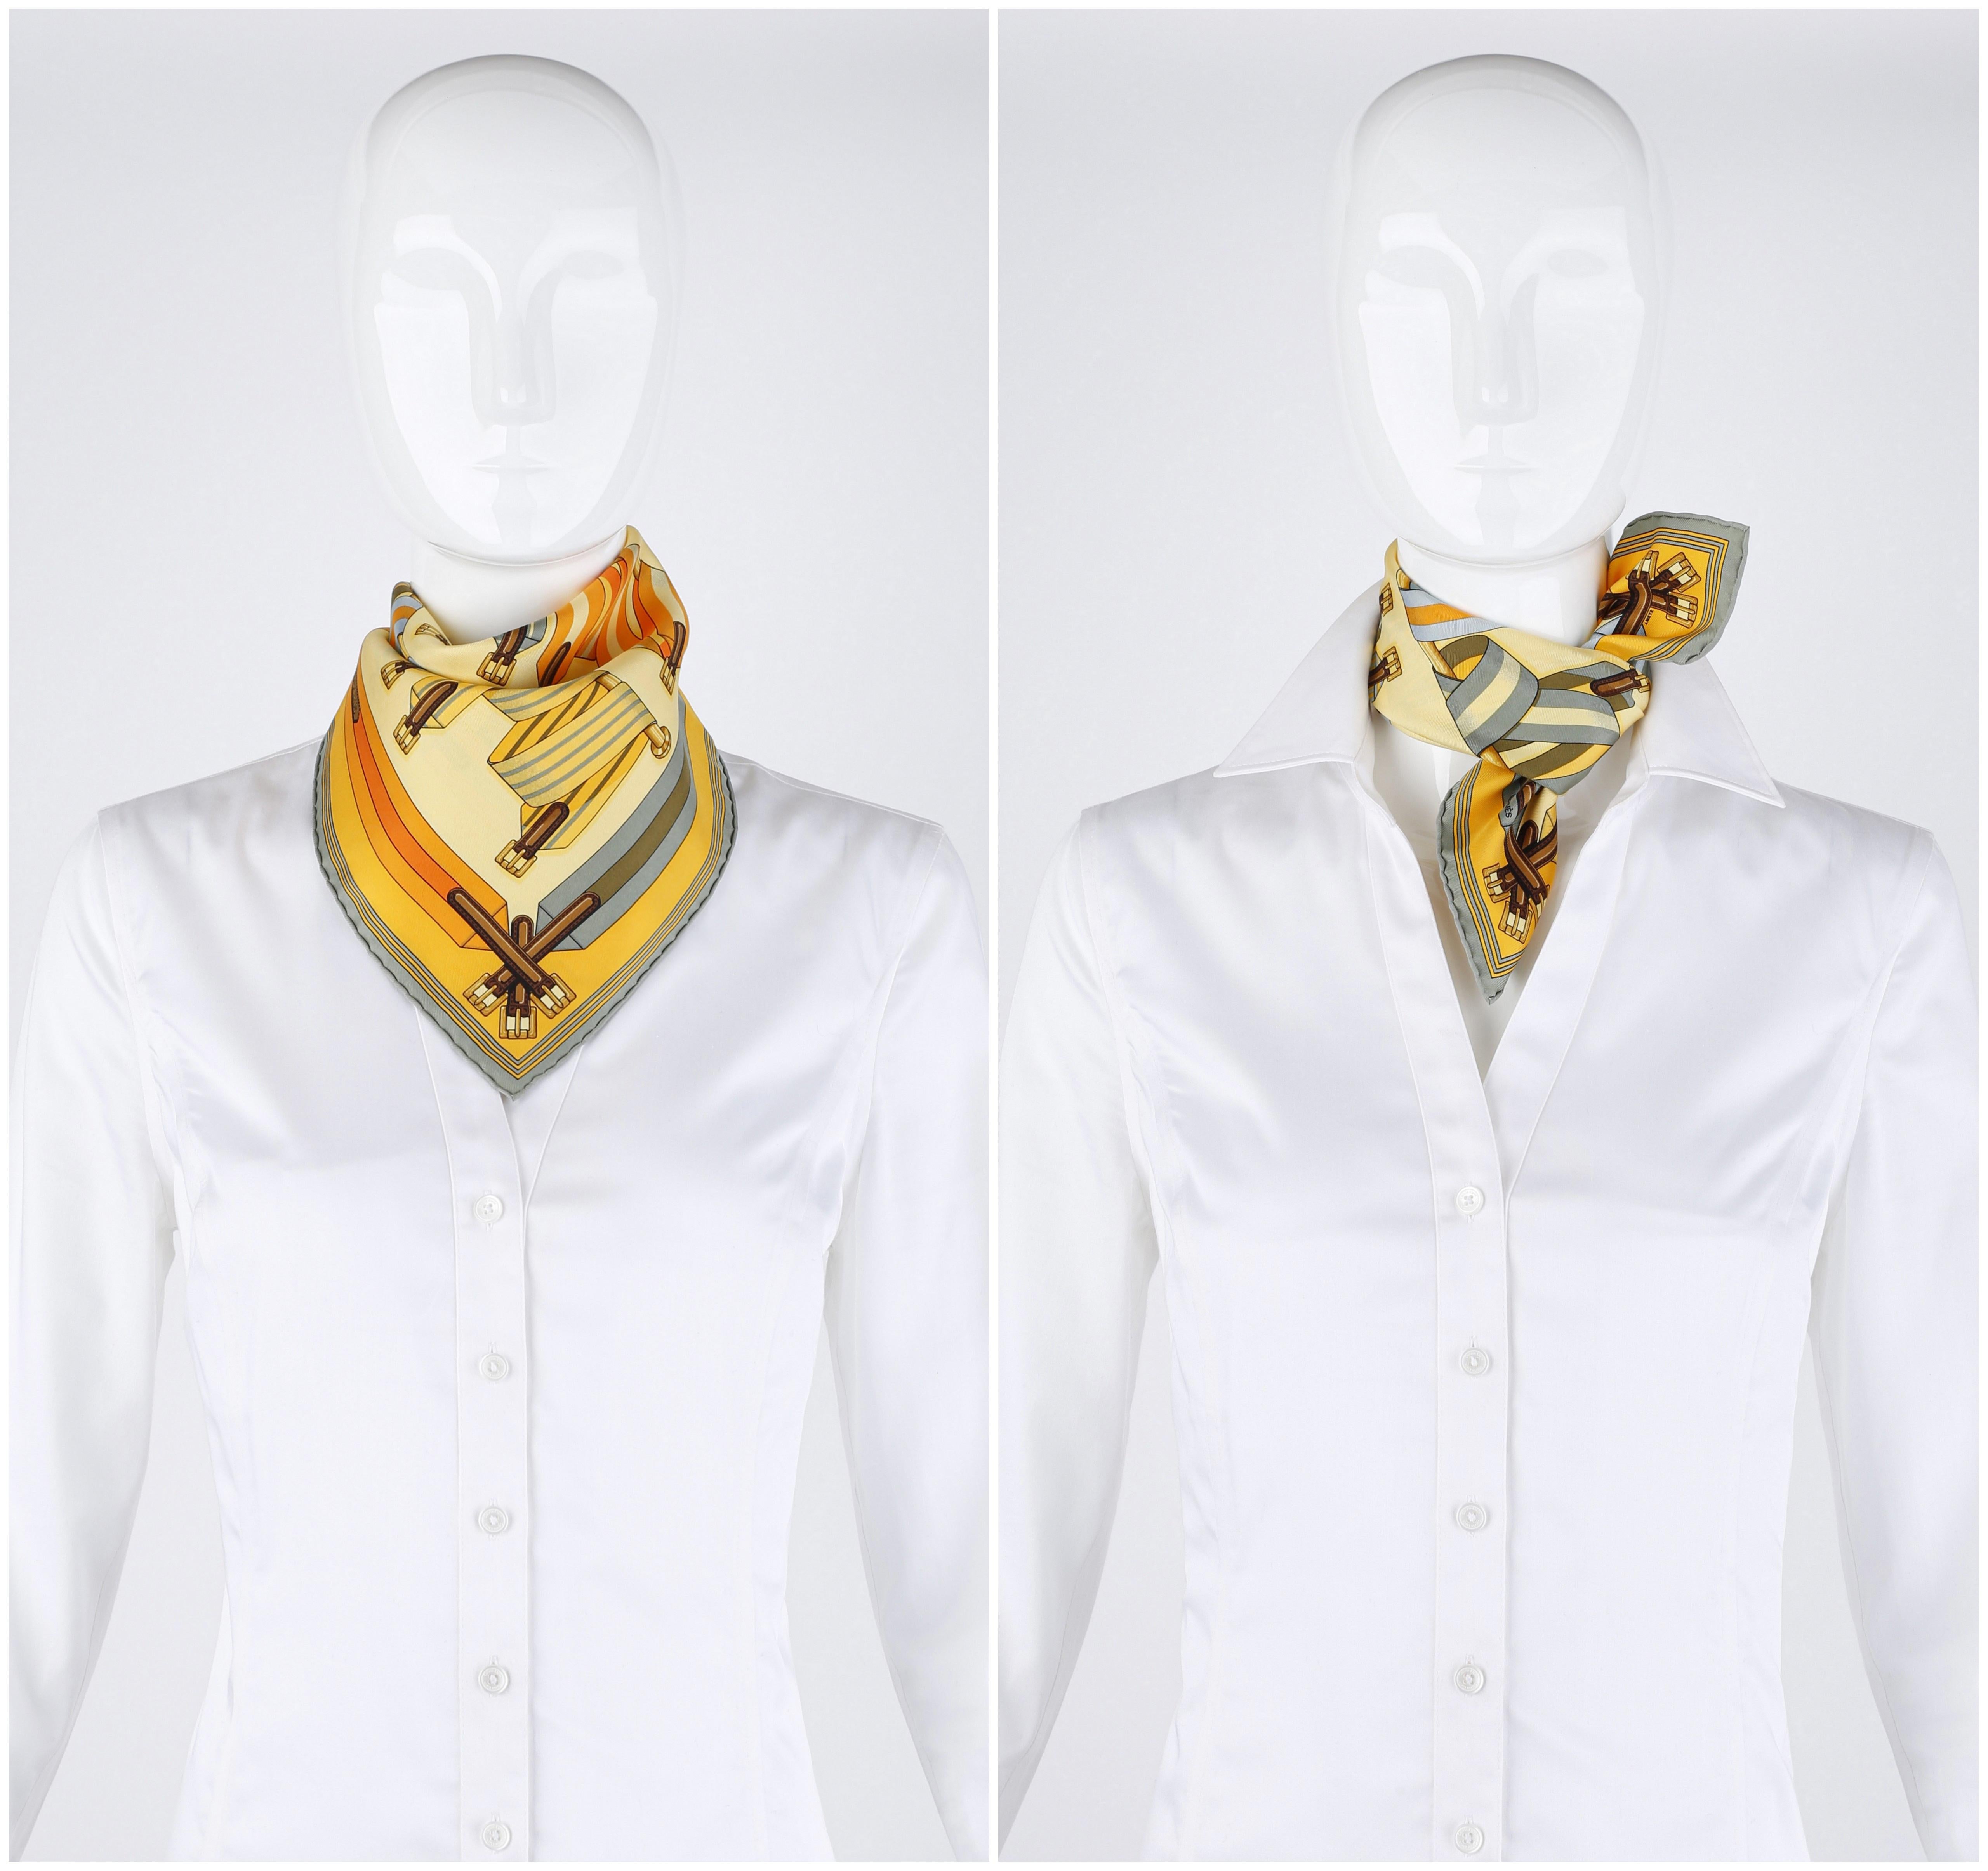 Author: J. Metz. Square shaped scarf / pocket square. Pattern features an assortment of striped buckled straps beautifully looped around 3 gold bars. This striking pattern is framed by more geometric striped straps and buckles. Hand rolled edges.